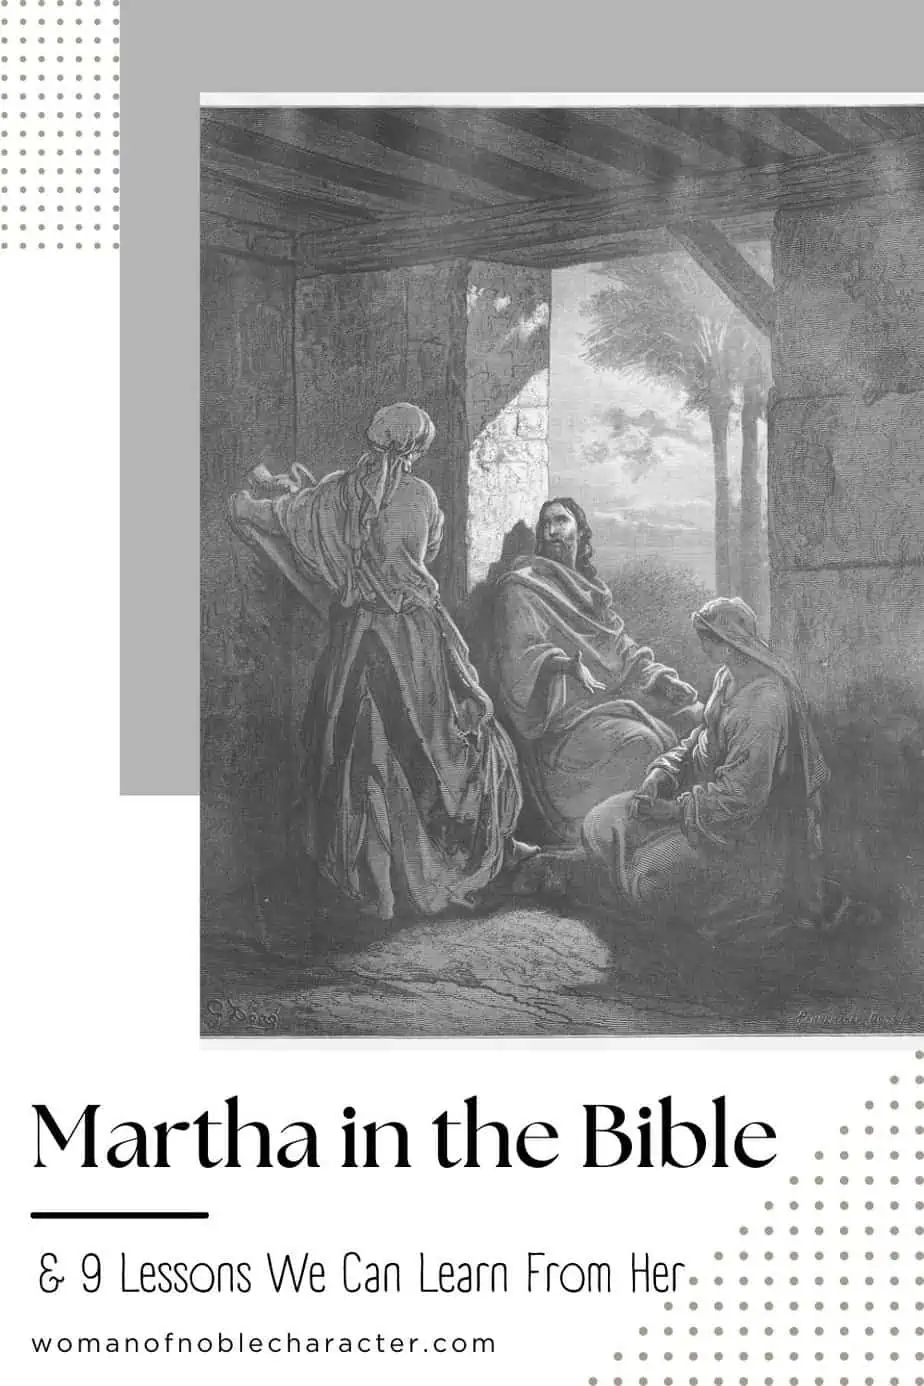 image of martha in the Bible with Mary and Jesus with the text Martha in the Bible and 9 lessons we can learn from her